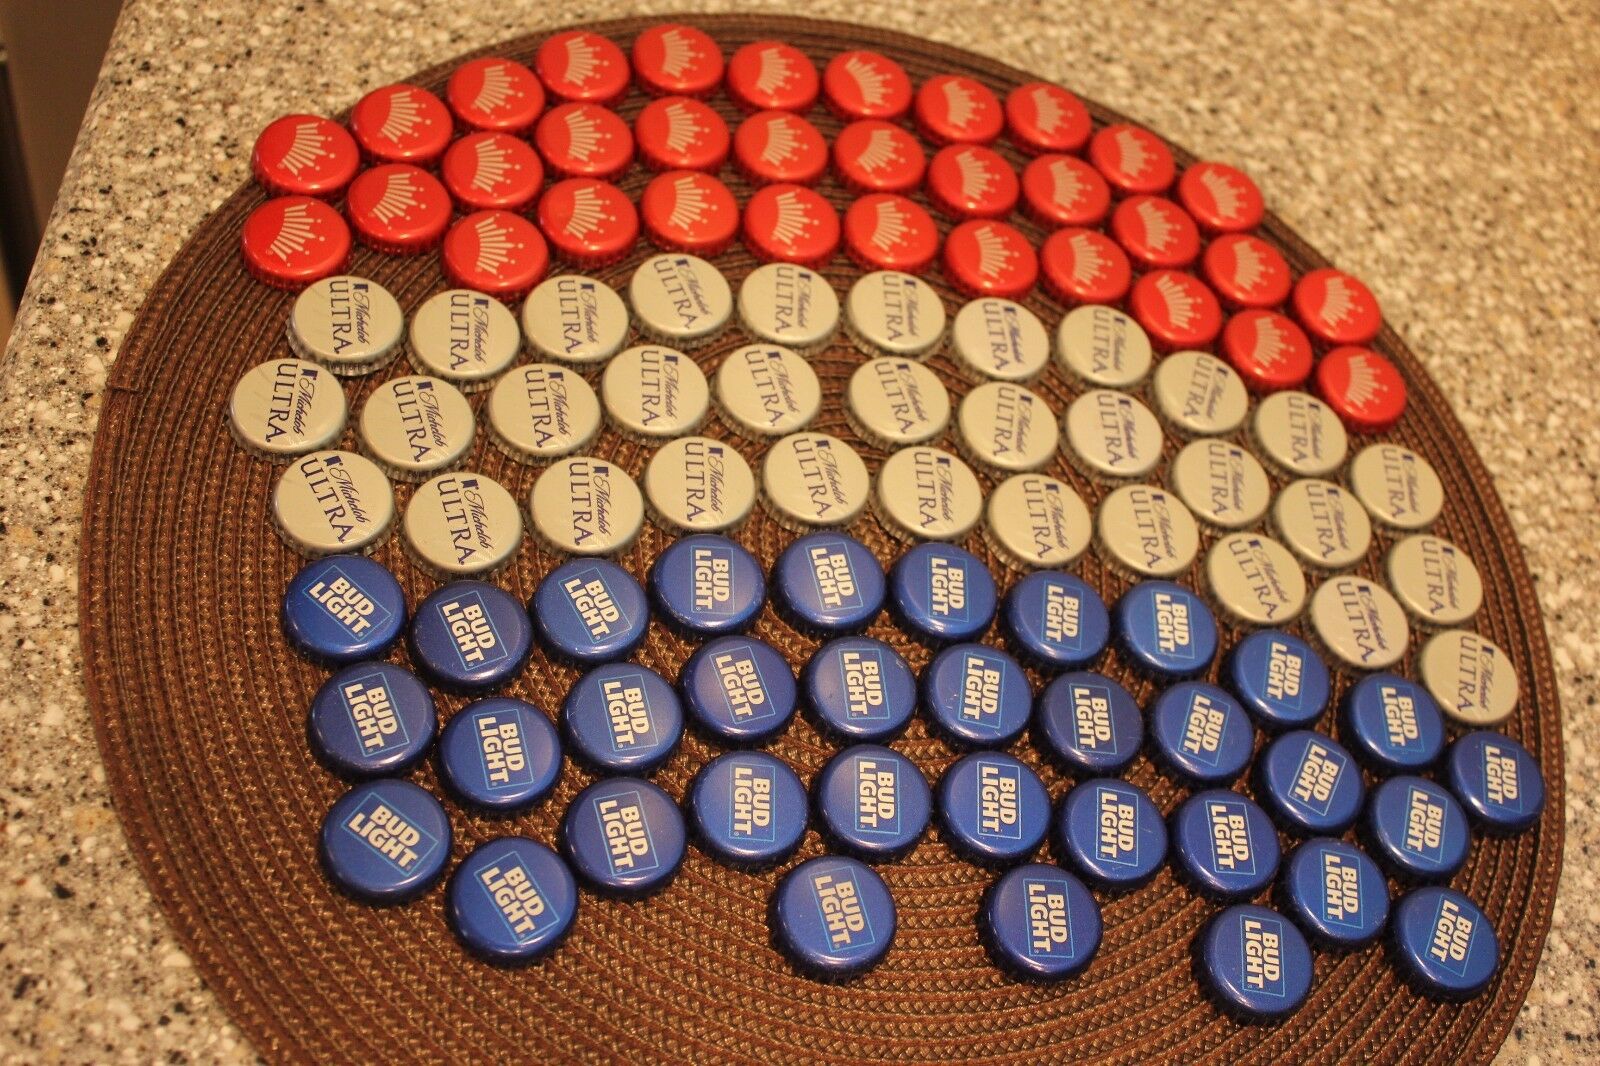 100 Red White Blue Beer Bottle Caps No Dents Flag Craft Free Fast Shipping!